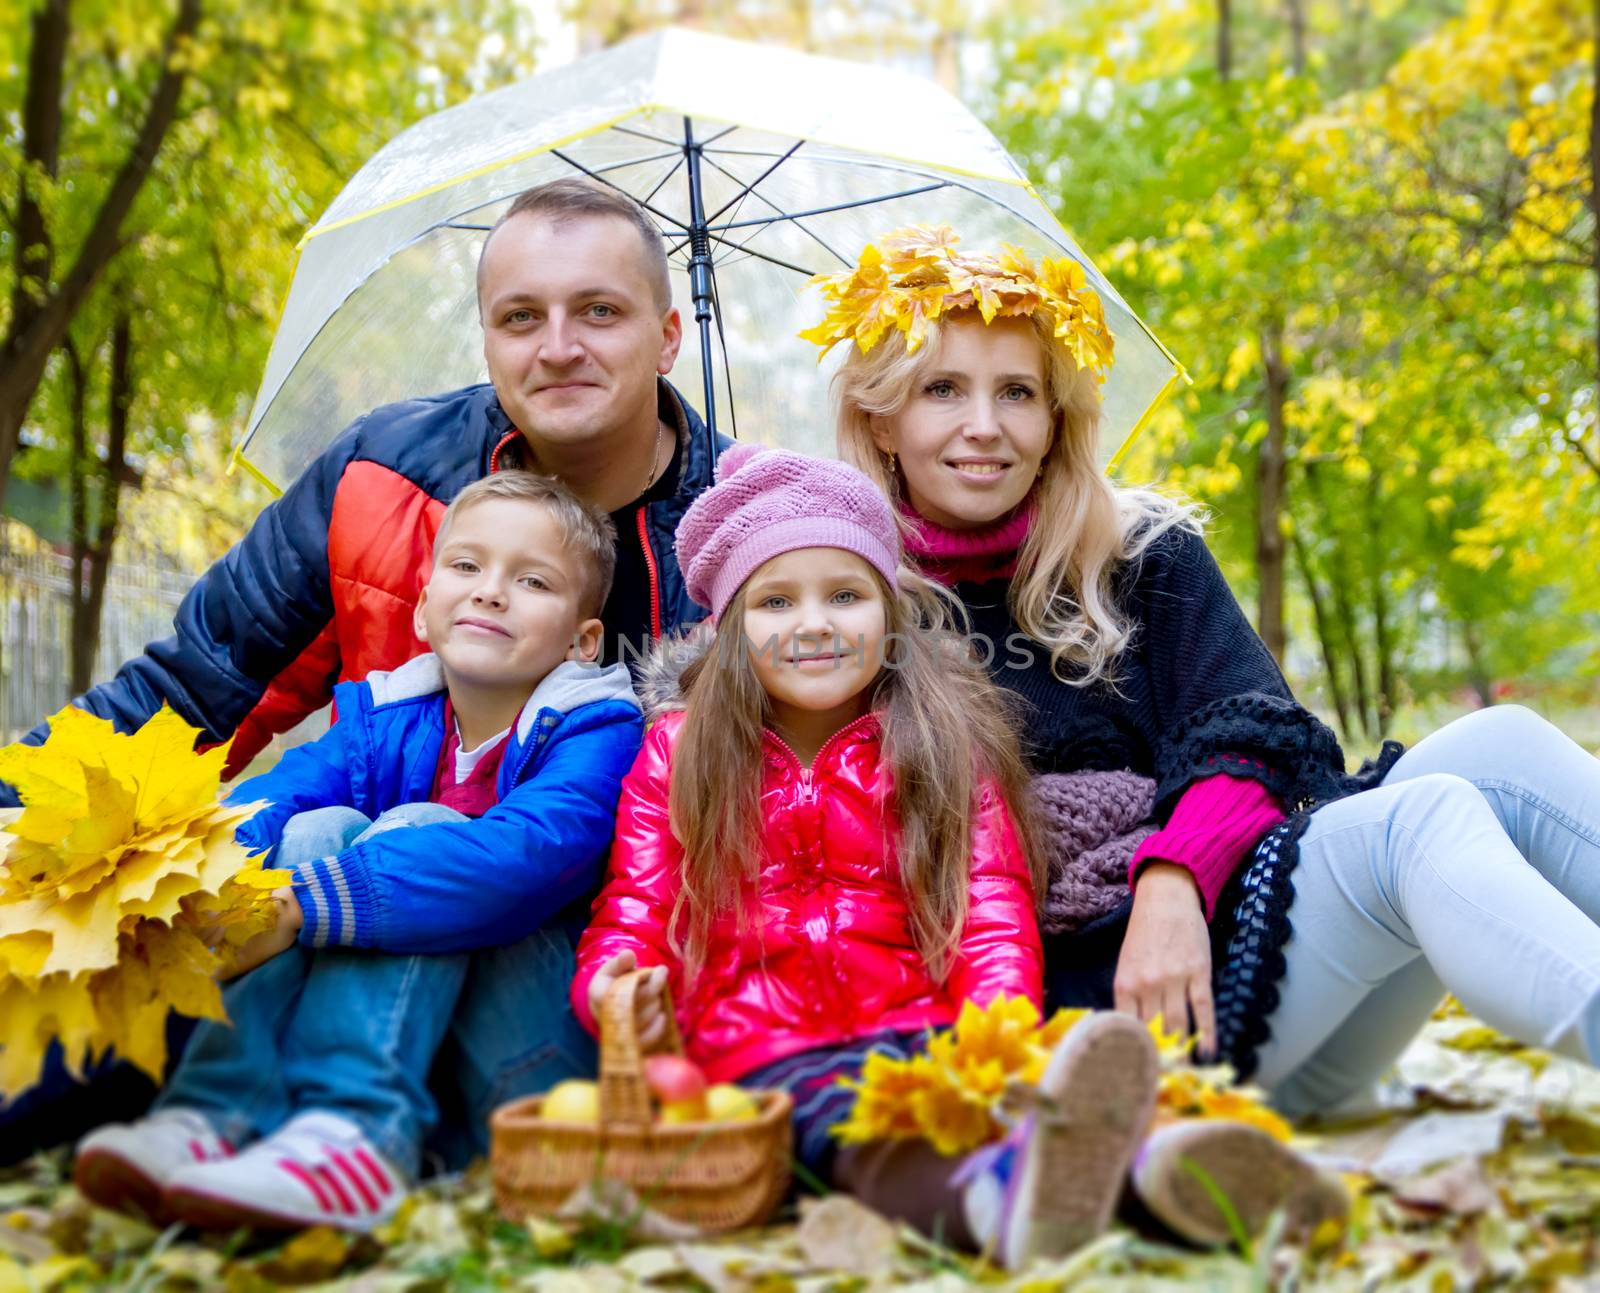 Family with two kids under umbrella and autumn leaves by Angel_a